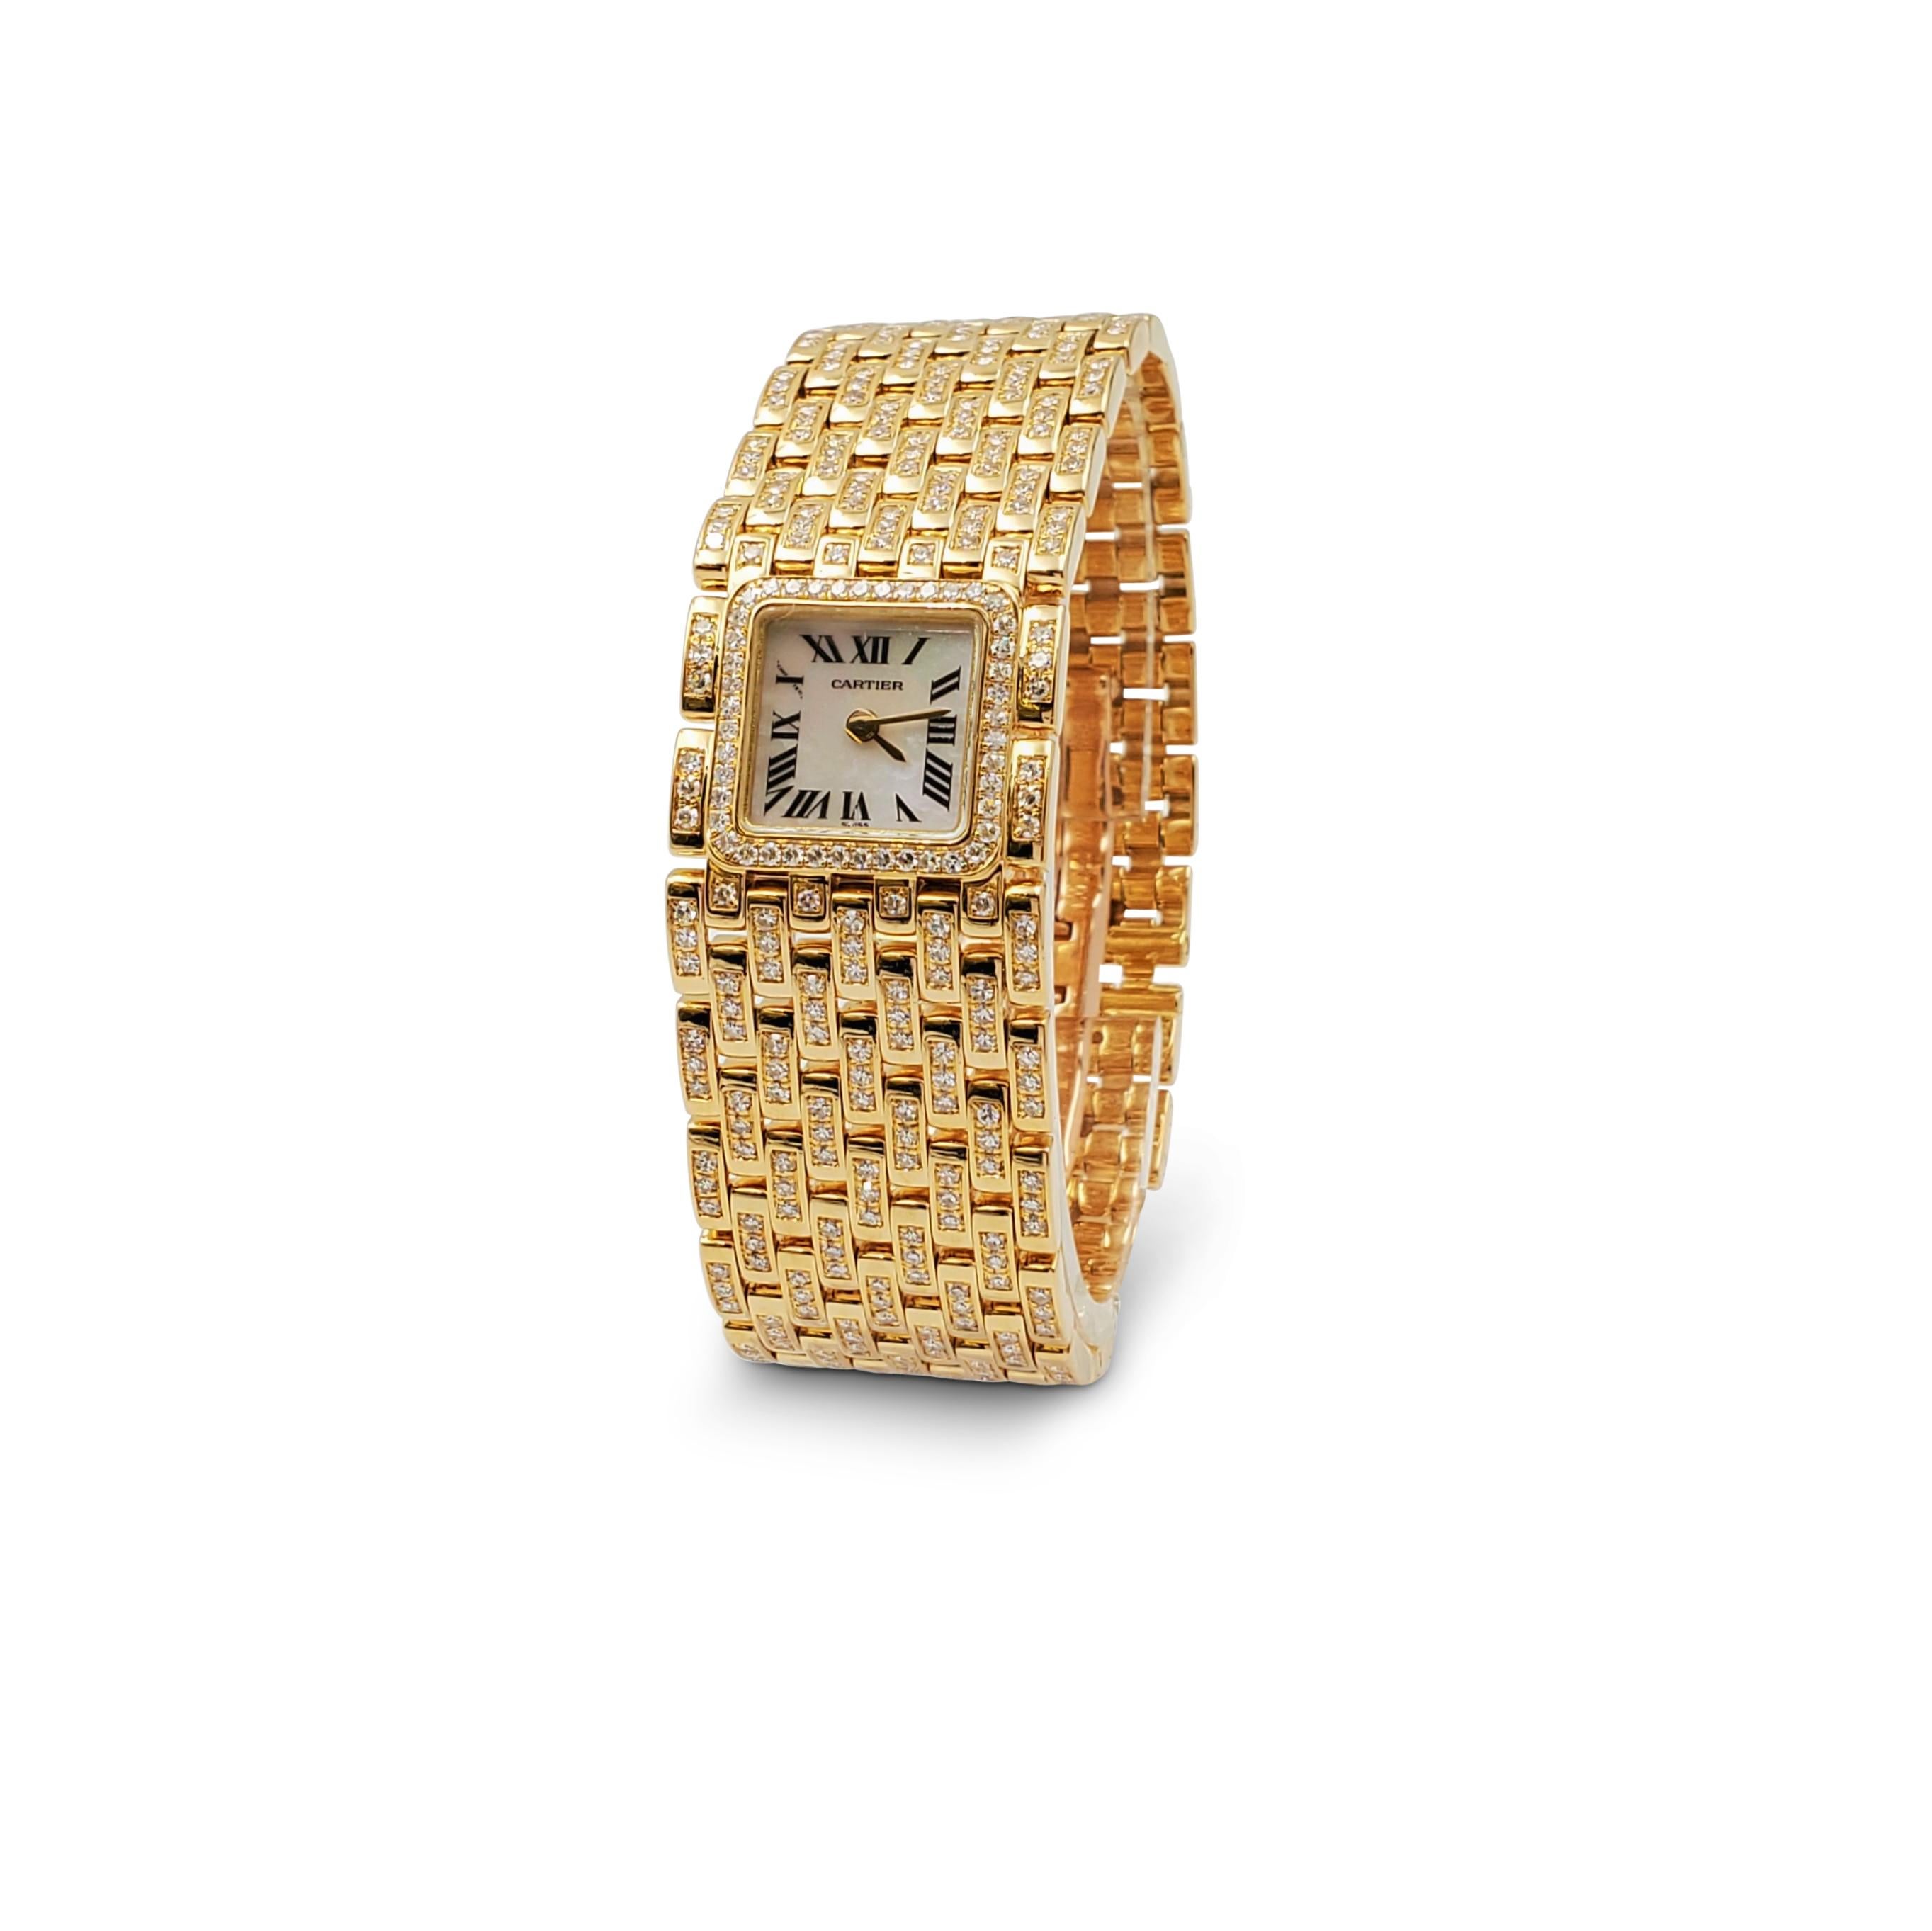 Authentic Cartier Panthere Ruban pave diamond set watch crafted in 18 karat yellow gold features a jewelry-like maillon bracelet. The square mother-of-pearl dial is completed with gold-toned sword-shaped hands, black Roman numerals, and a secret